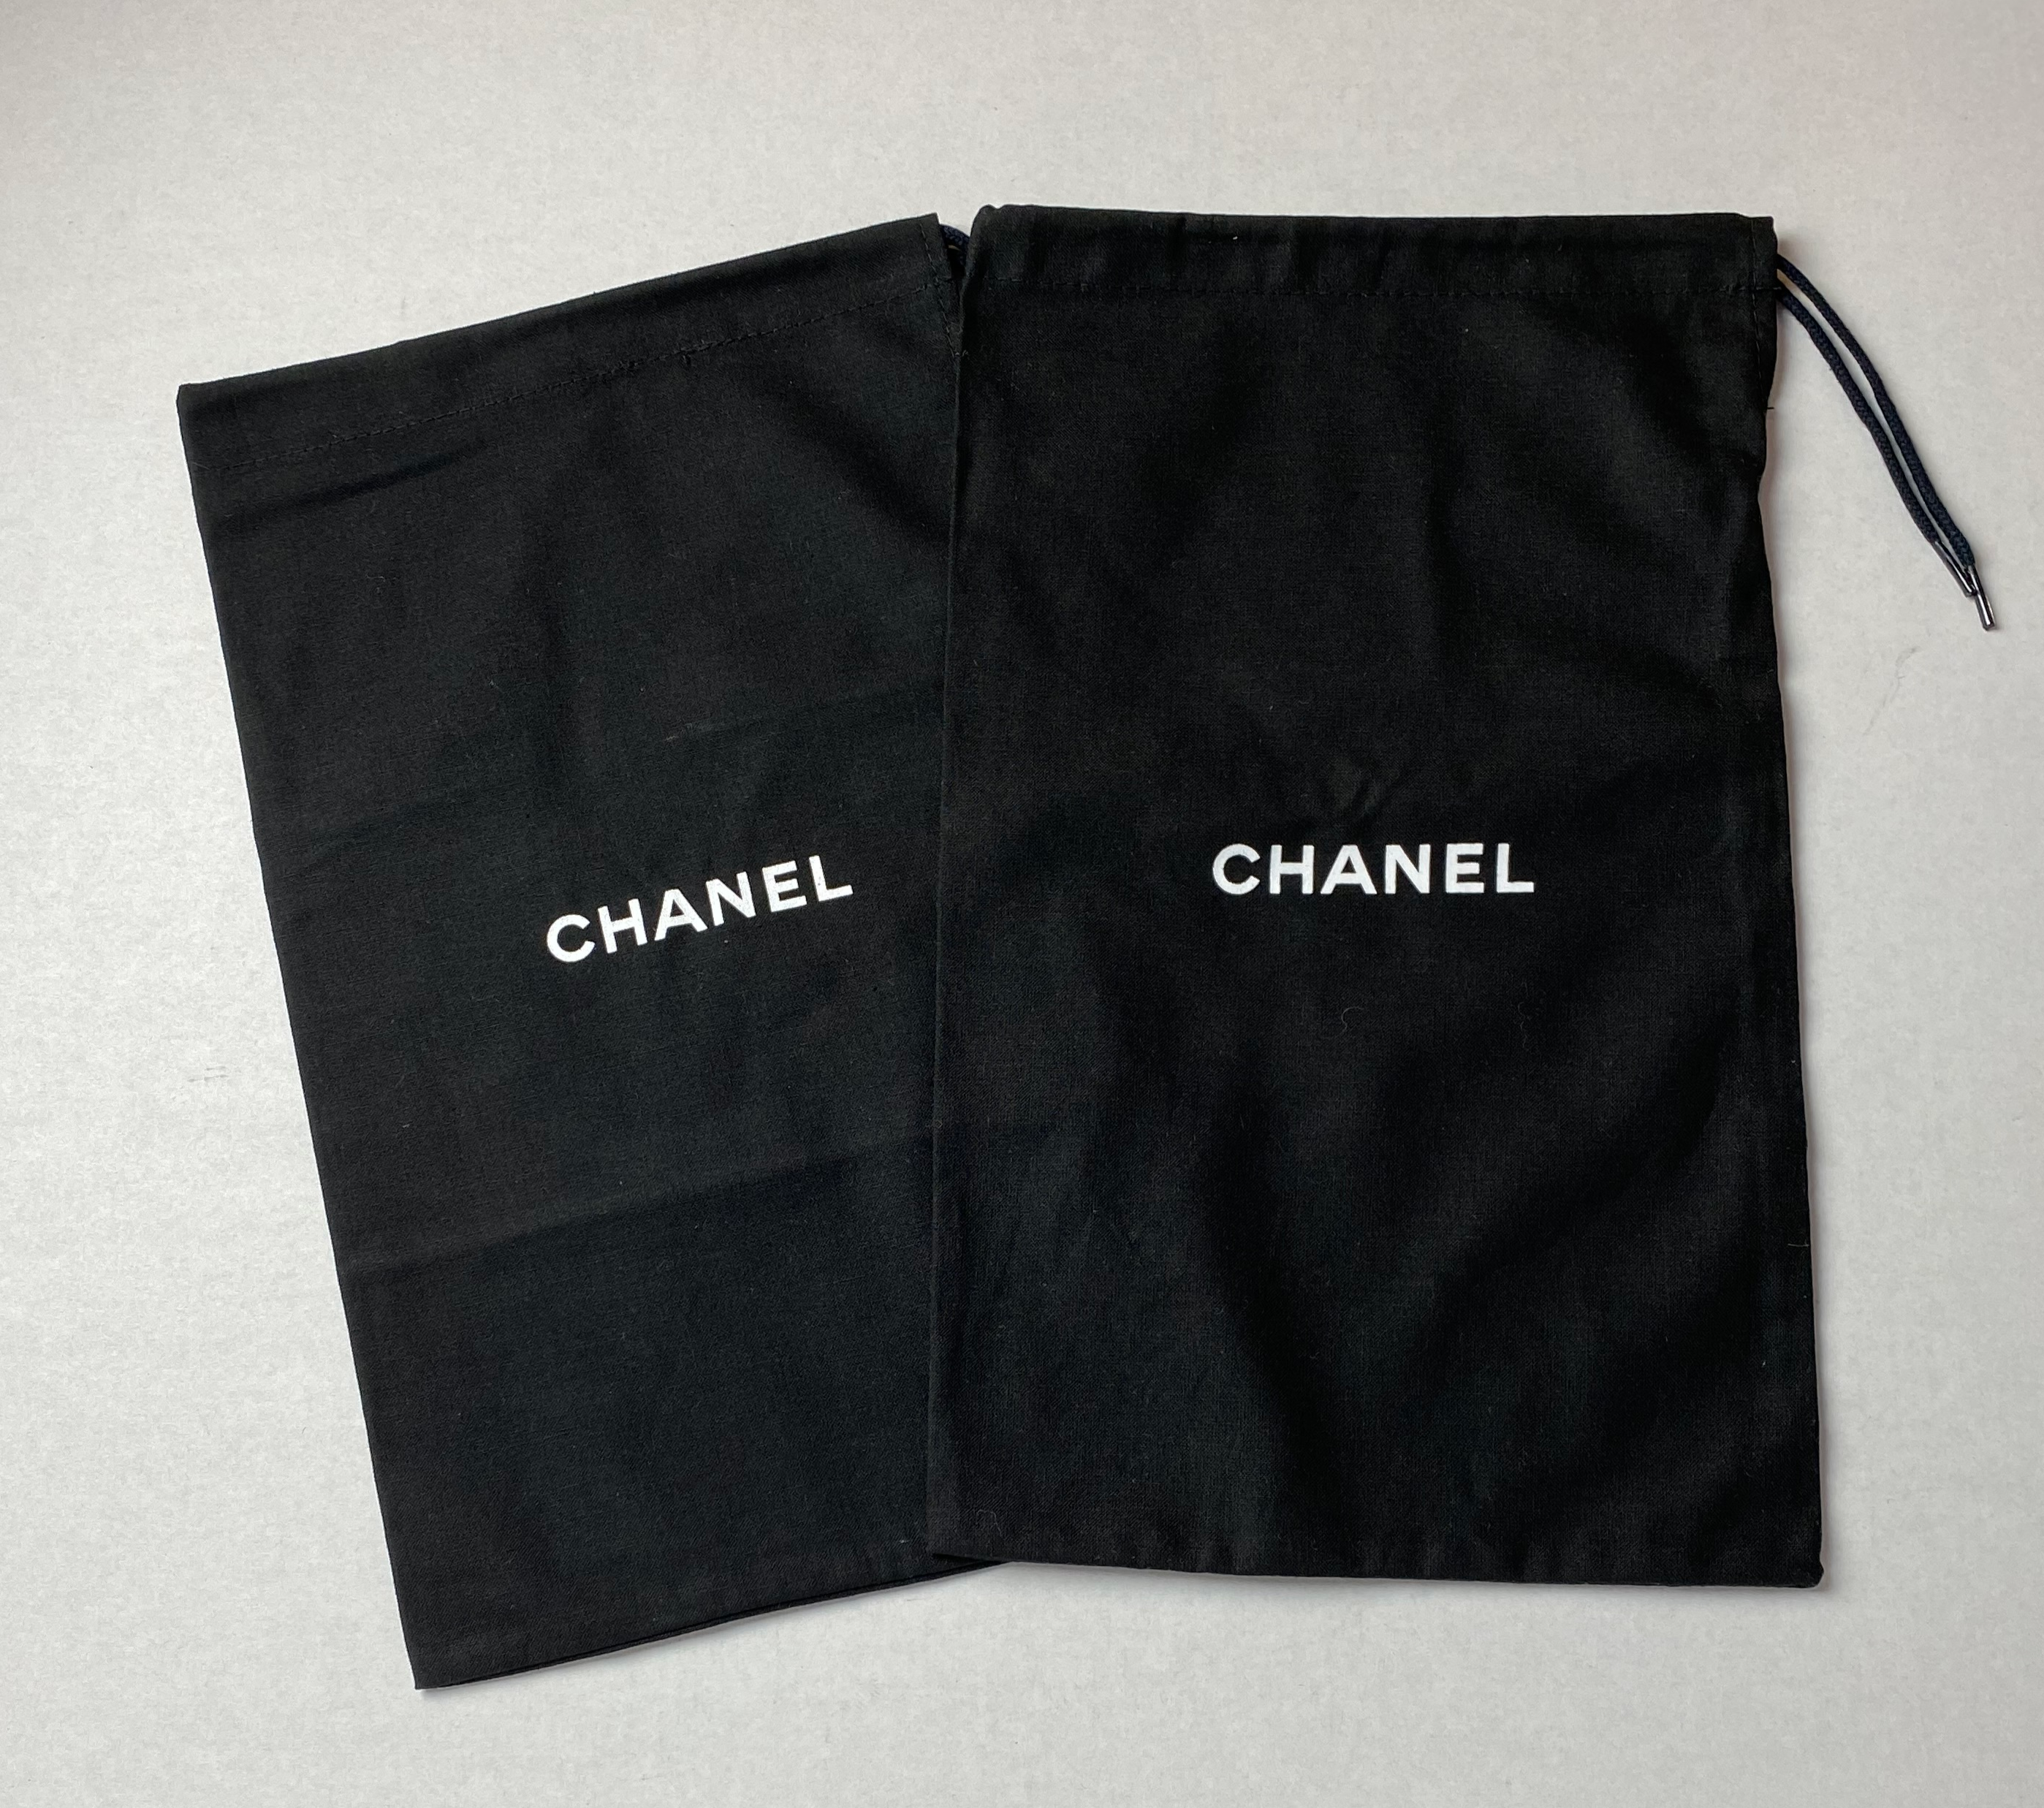 100% Auth Chanel Set of Two Black Shoe/ Small Bag/ Wallet Dust Bags 13